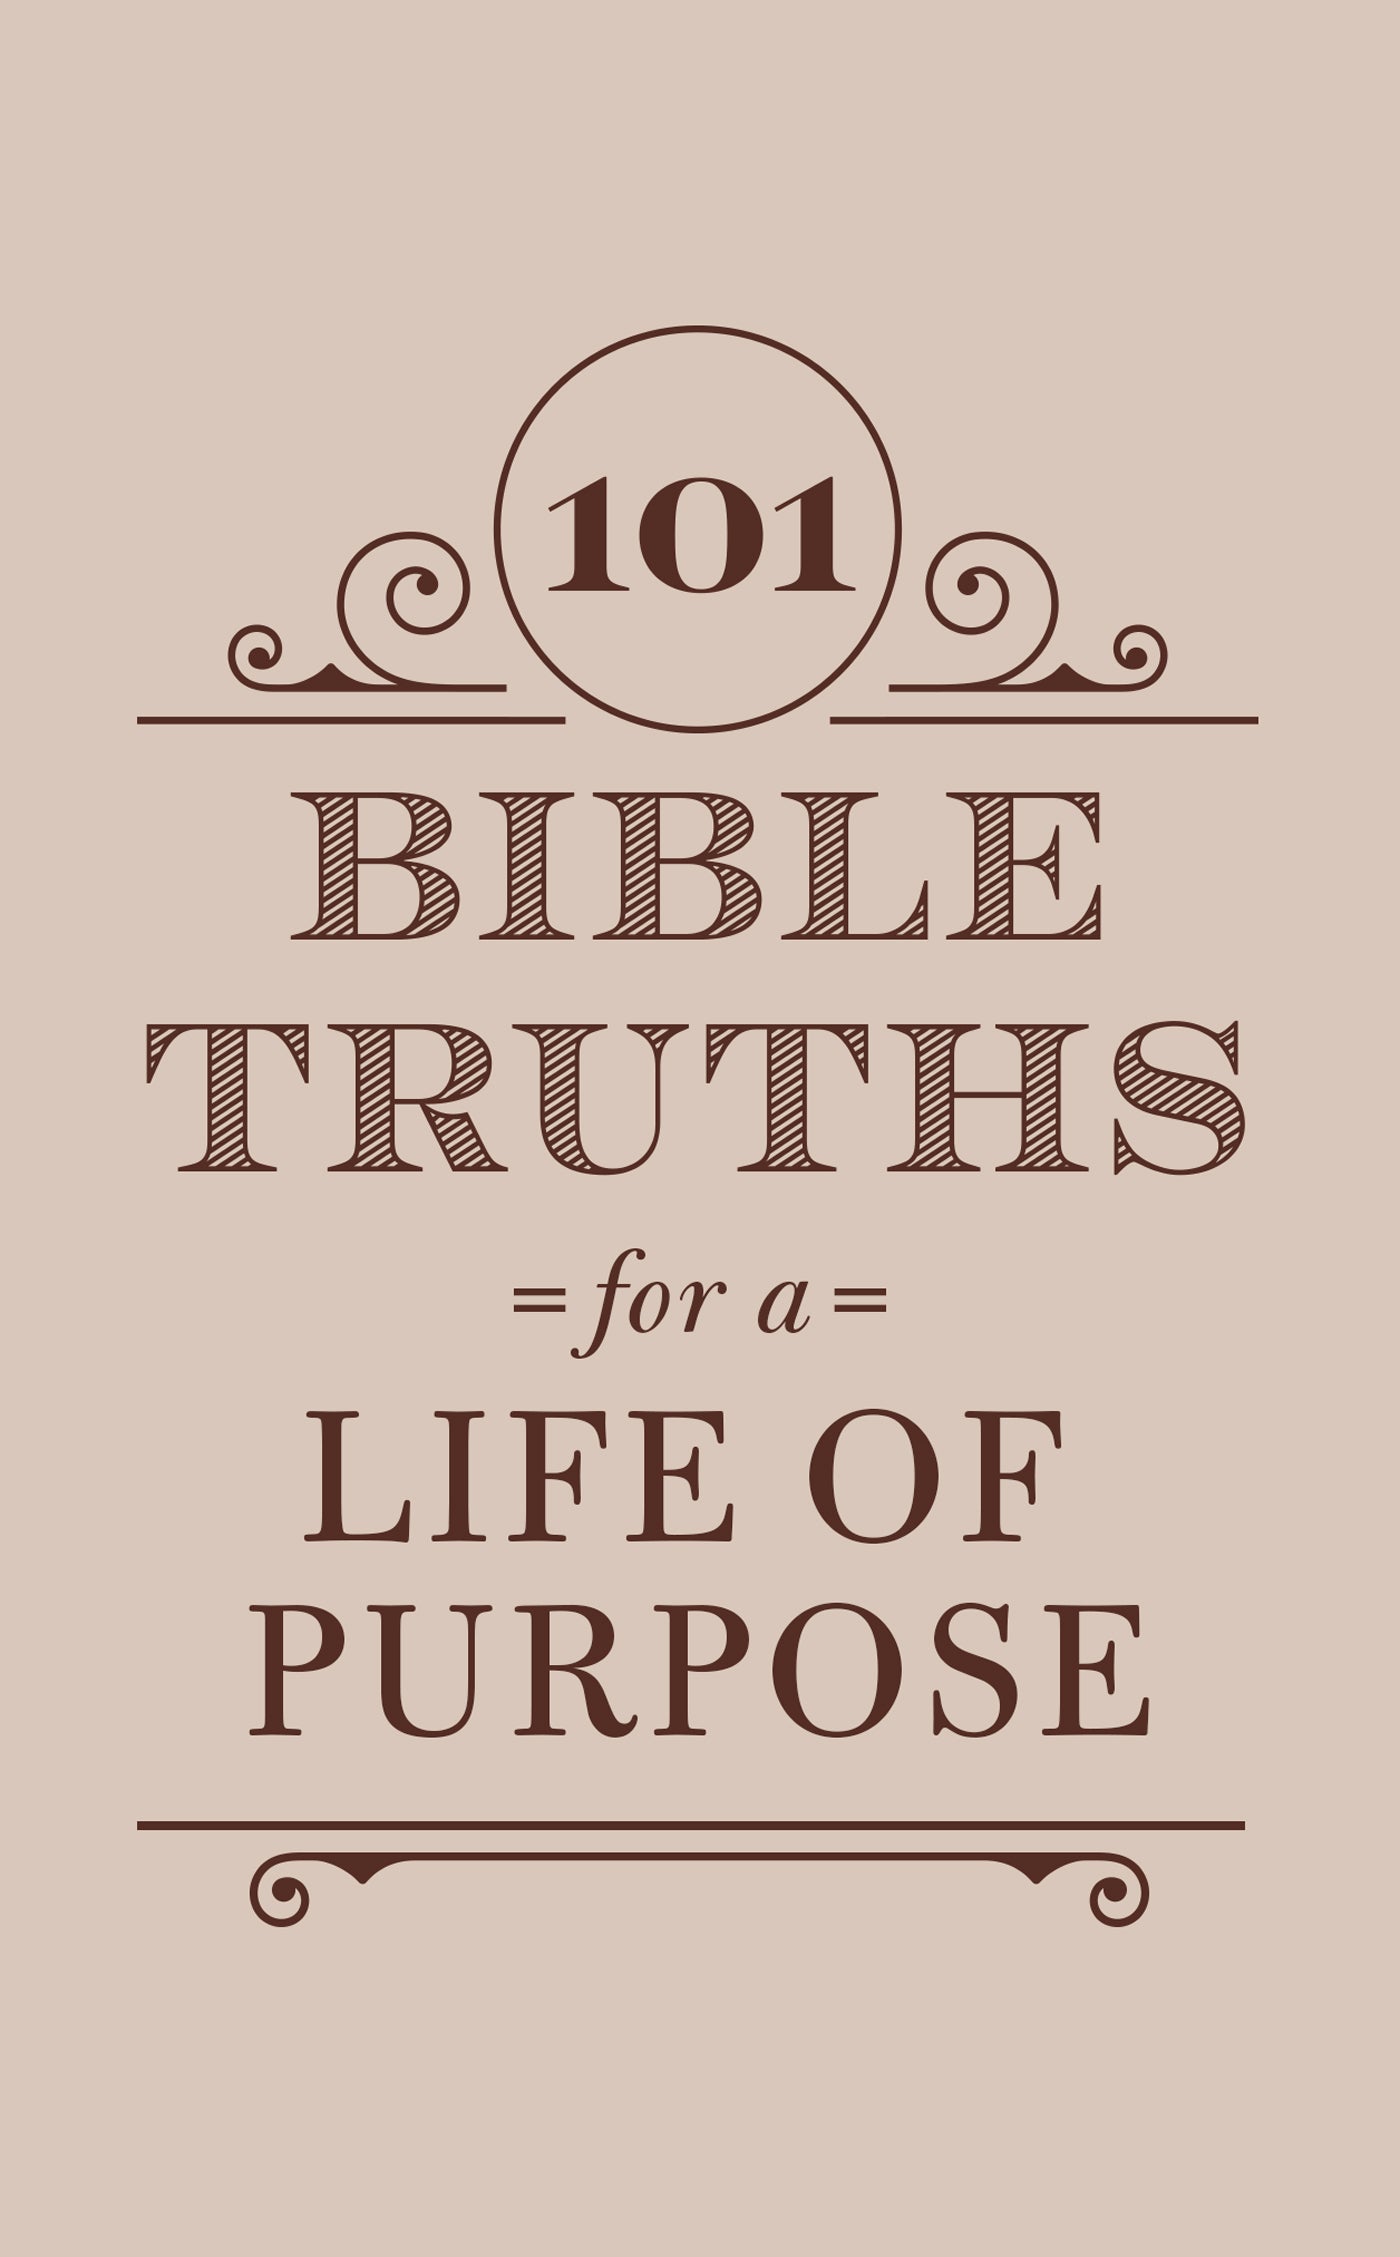 101 Bible Truths for a Life of Purpose - The Christian Gift Company